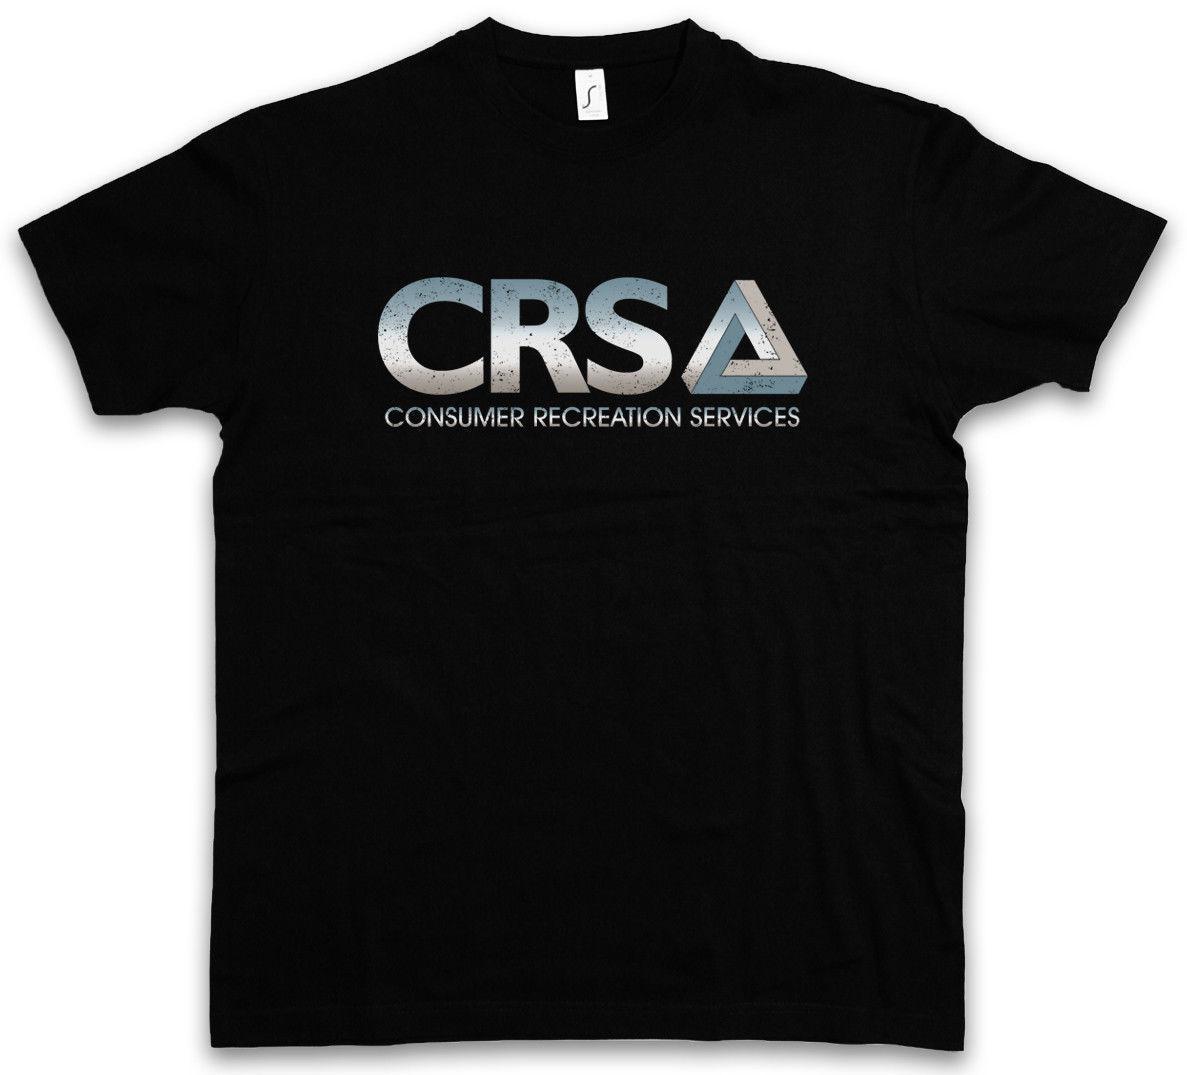 Cool Game Company Logo - CRS LOGO T SHIRT Consumer Recreation The Services Game Company Logo ...